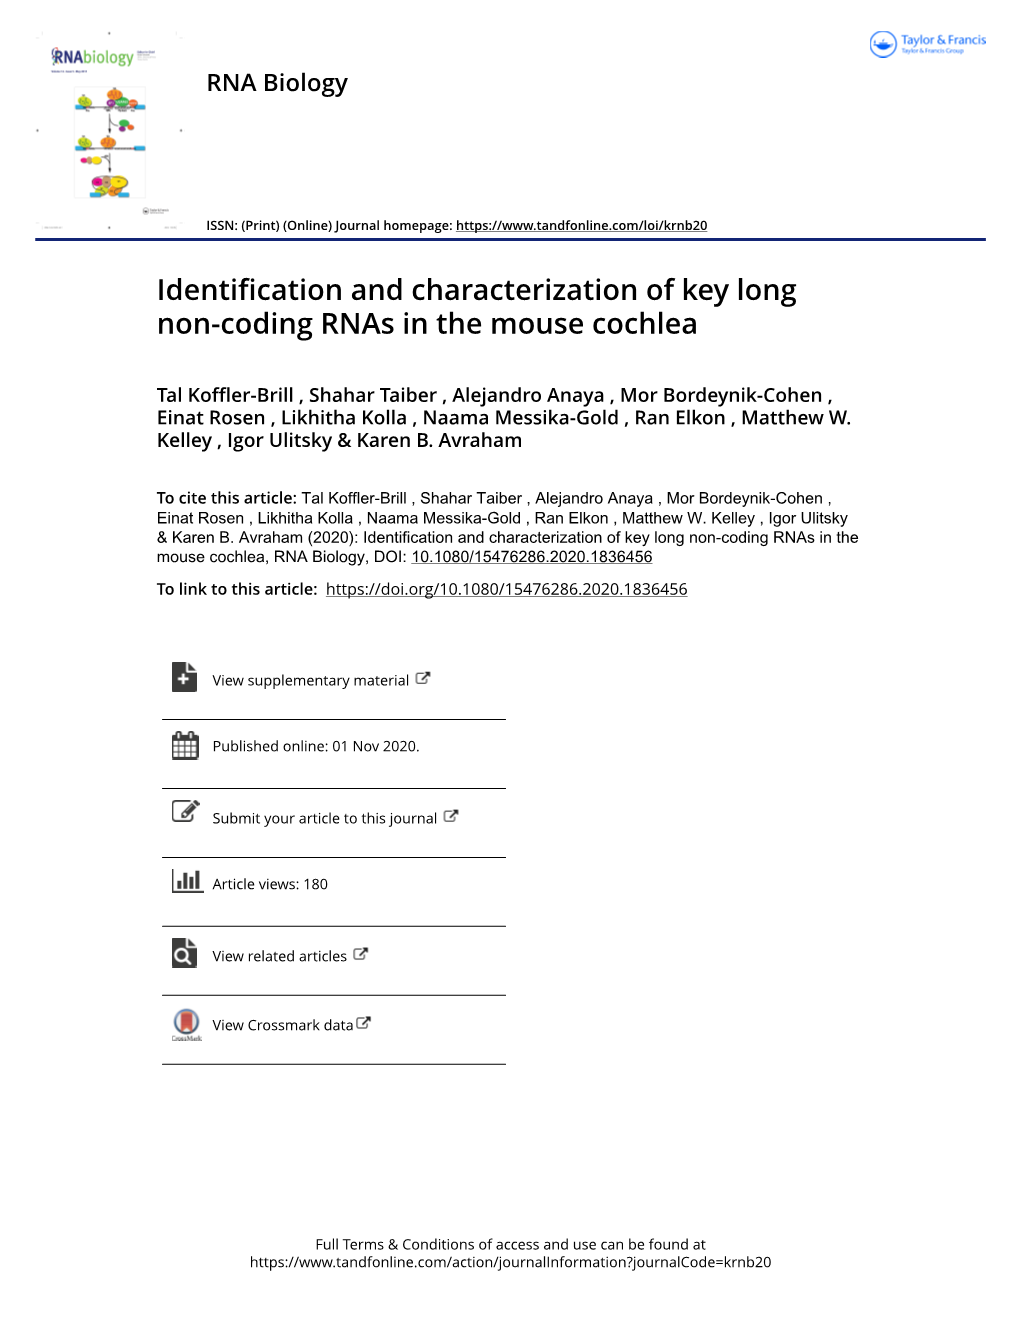 Identification and Characterization of Key Long Non-Coding Rnas in the Mouse Cochlea